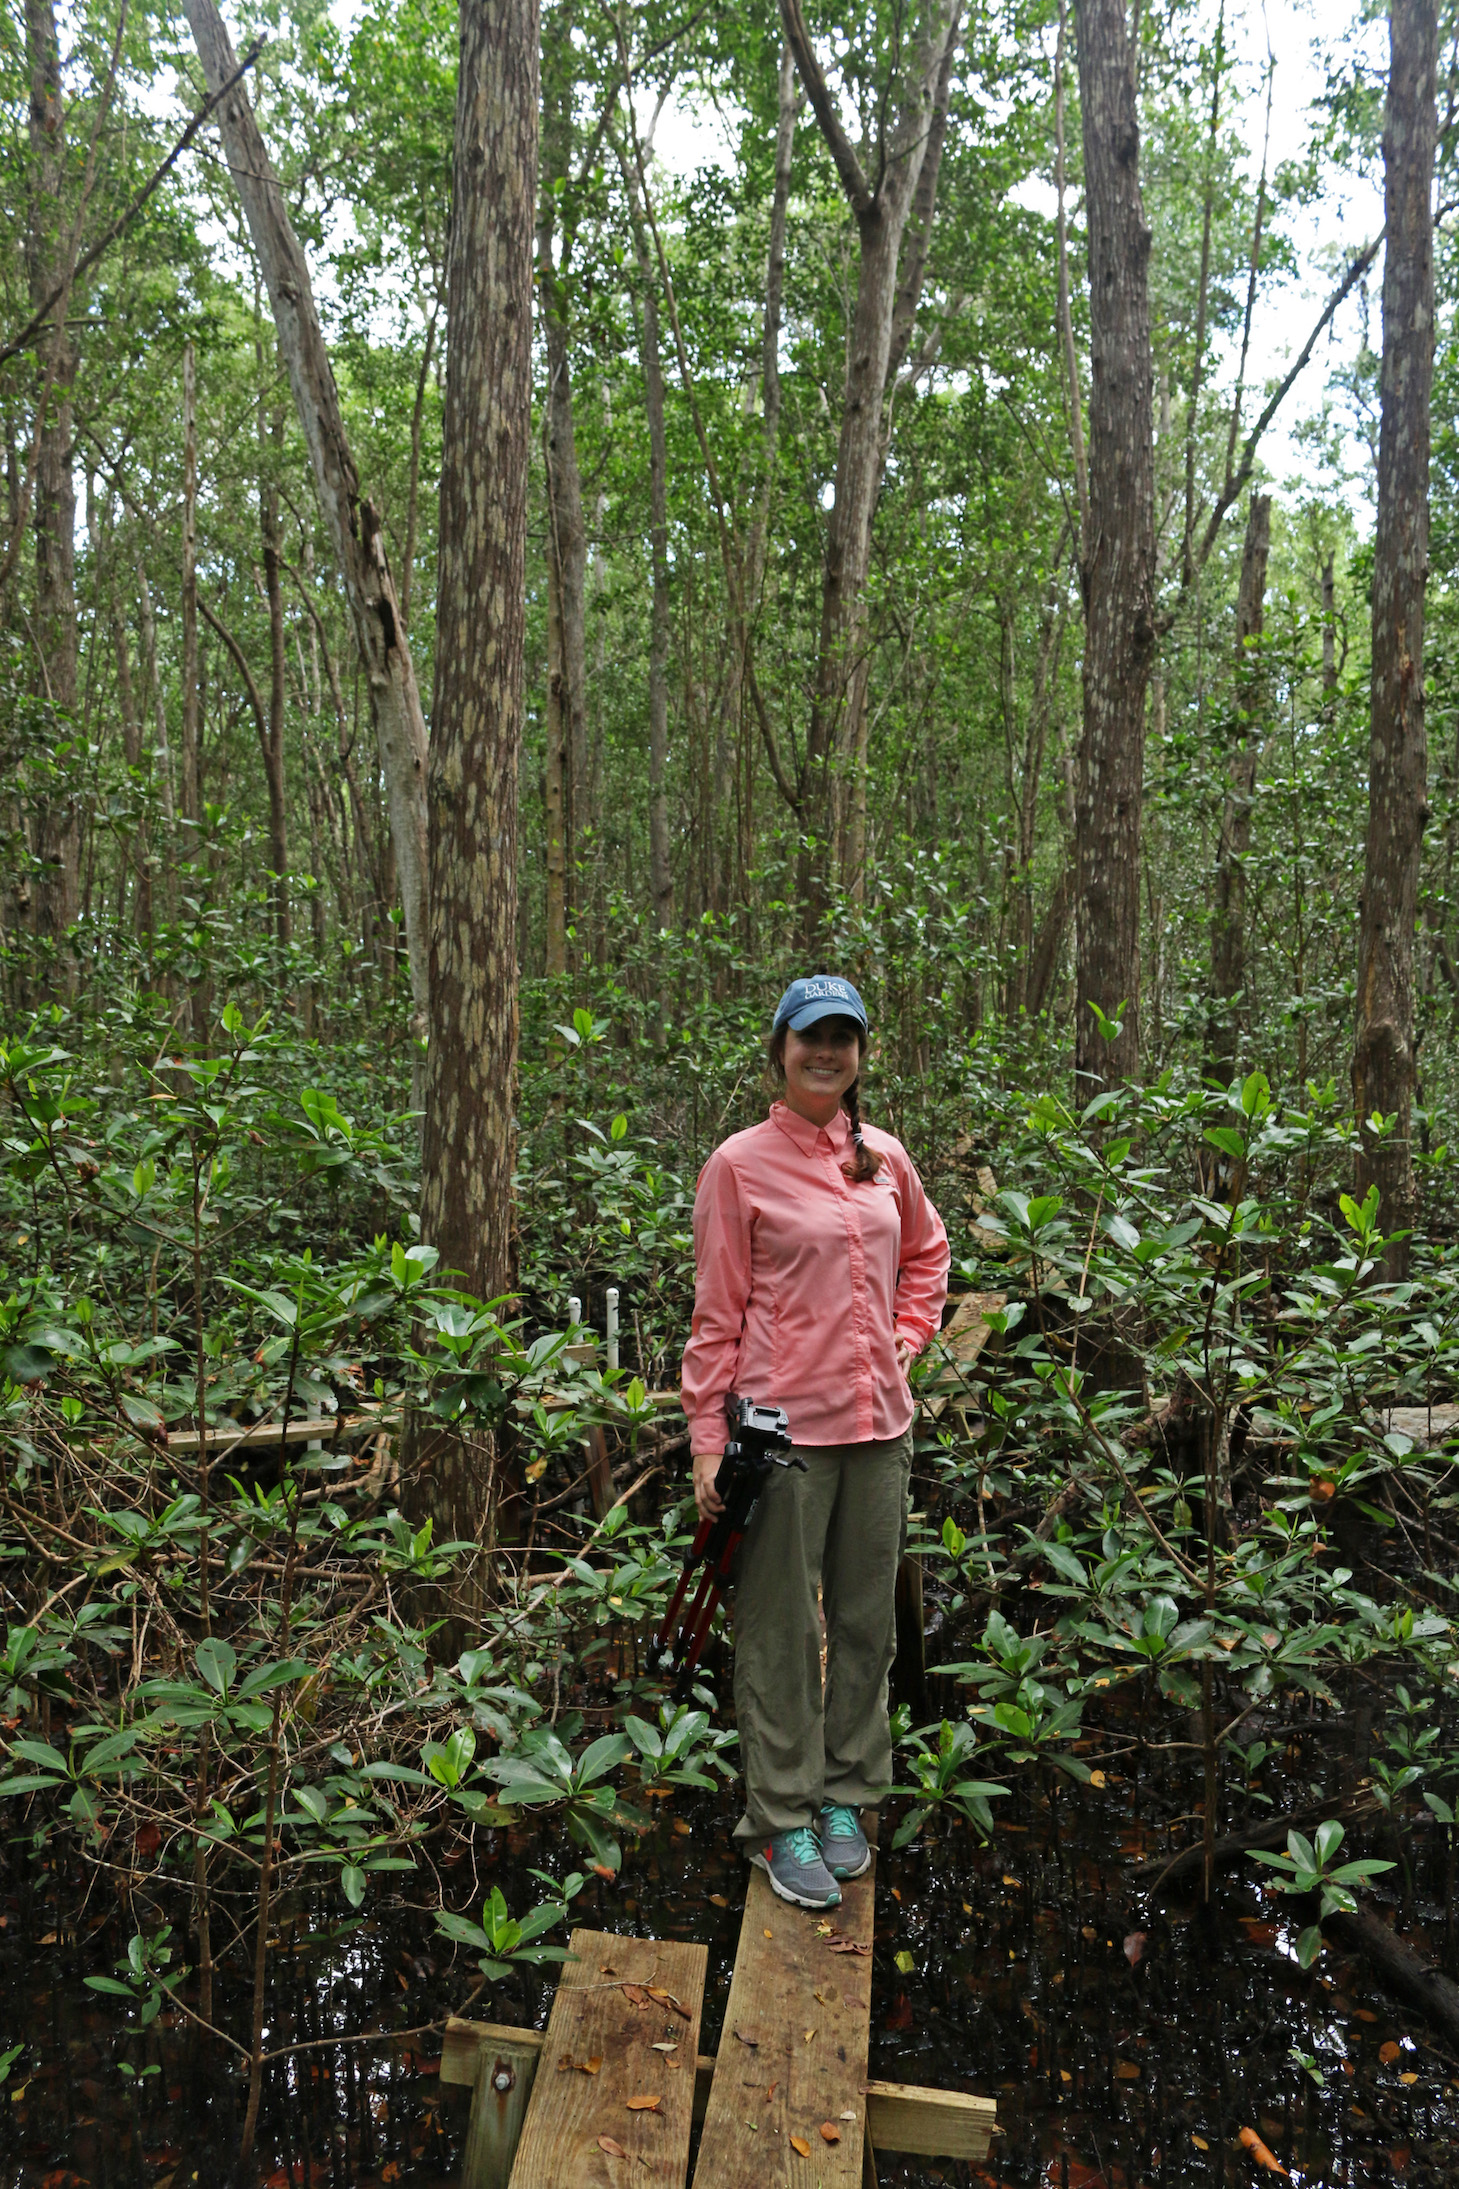 The author traverses wooden plants to reach a study site deep within the FCE mangroves.